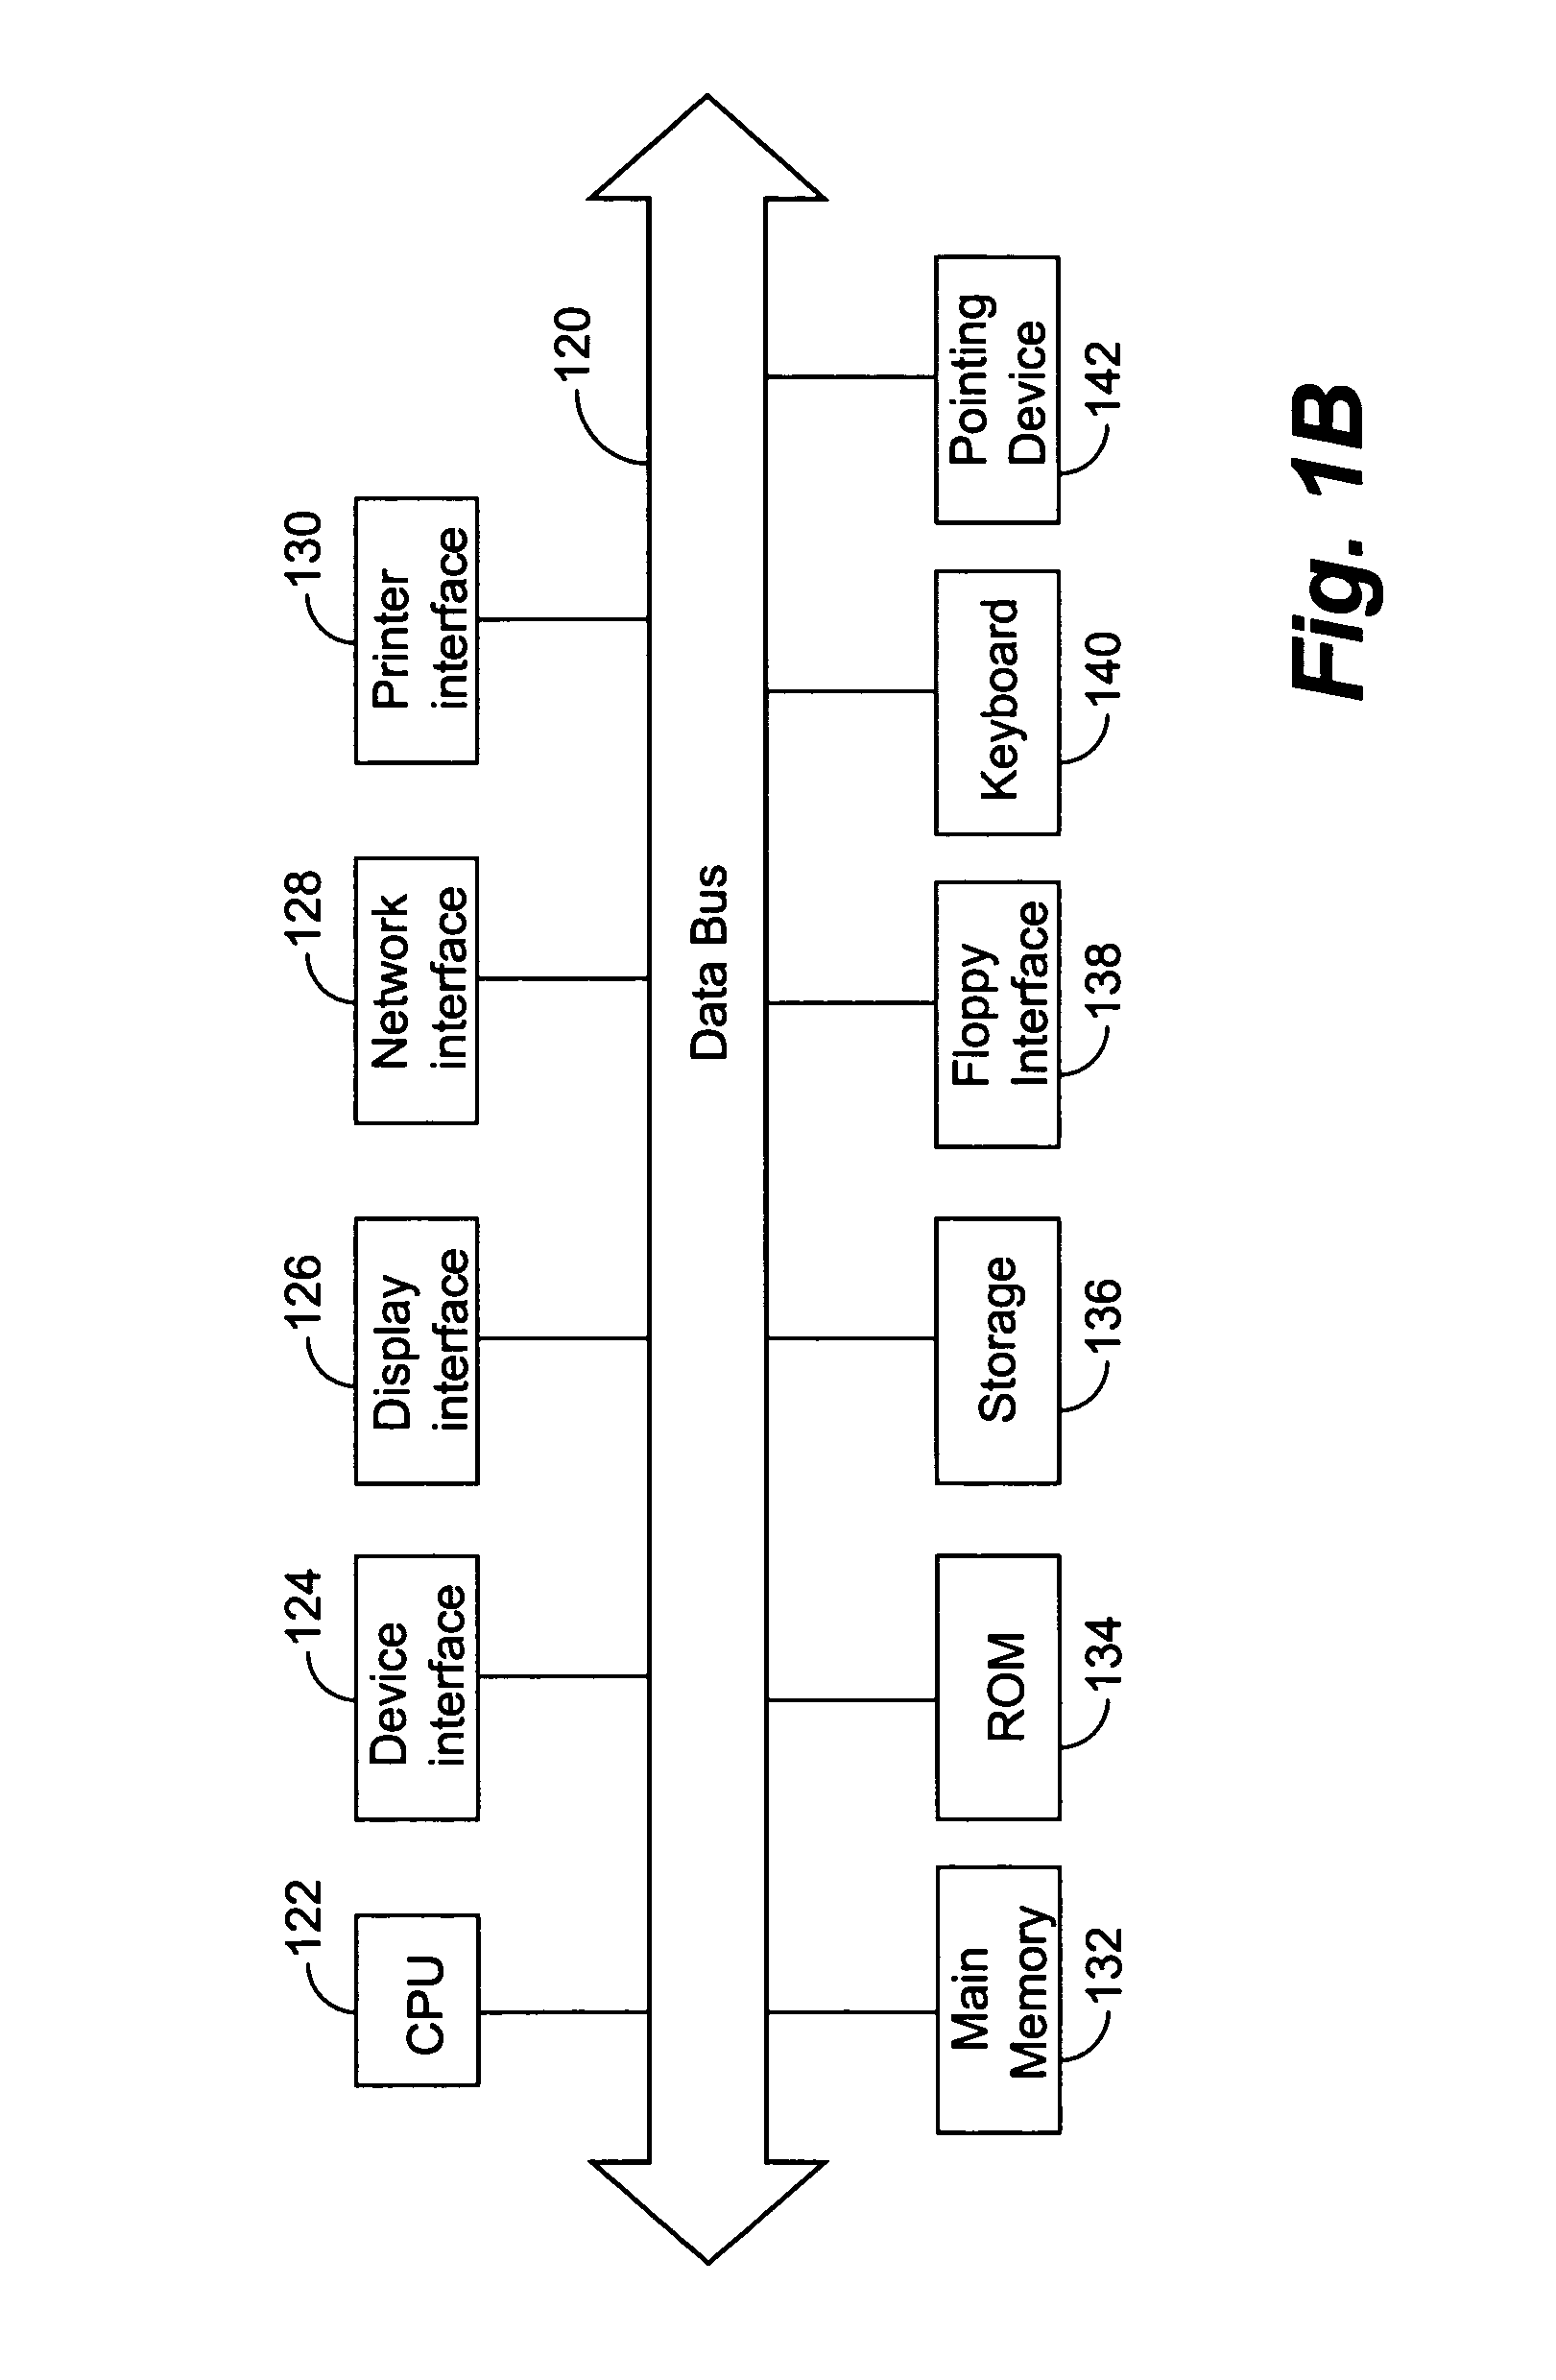 Method and system for generating fully-textured 3D